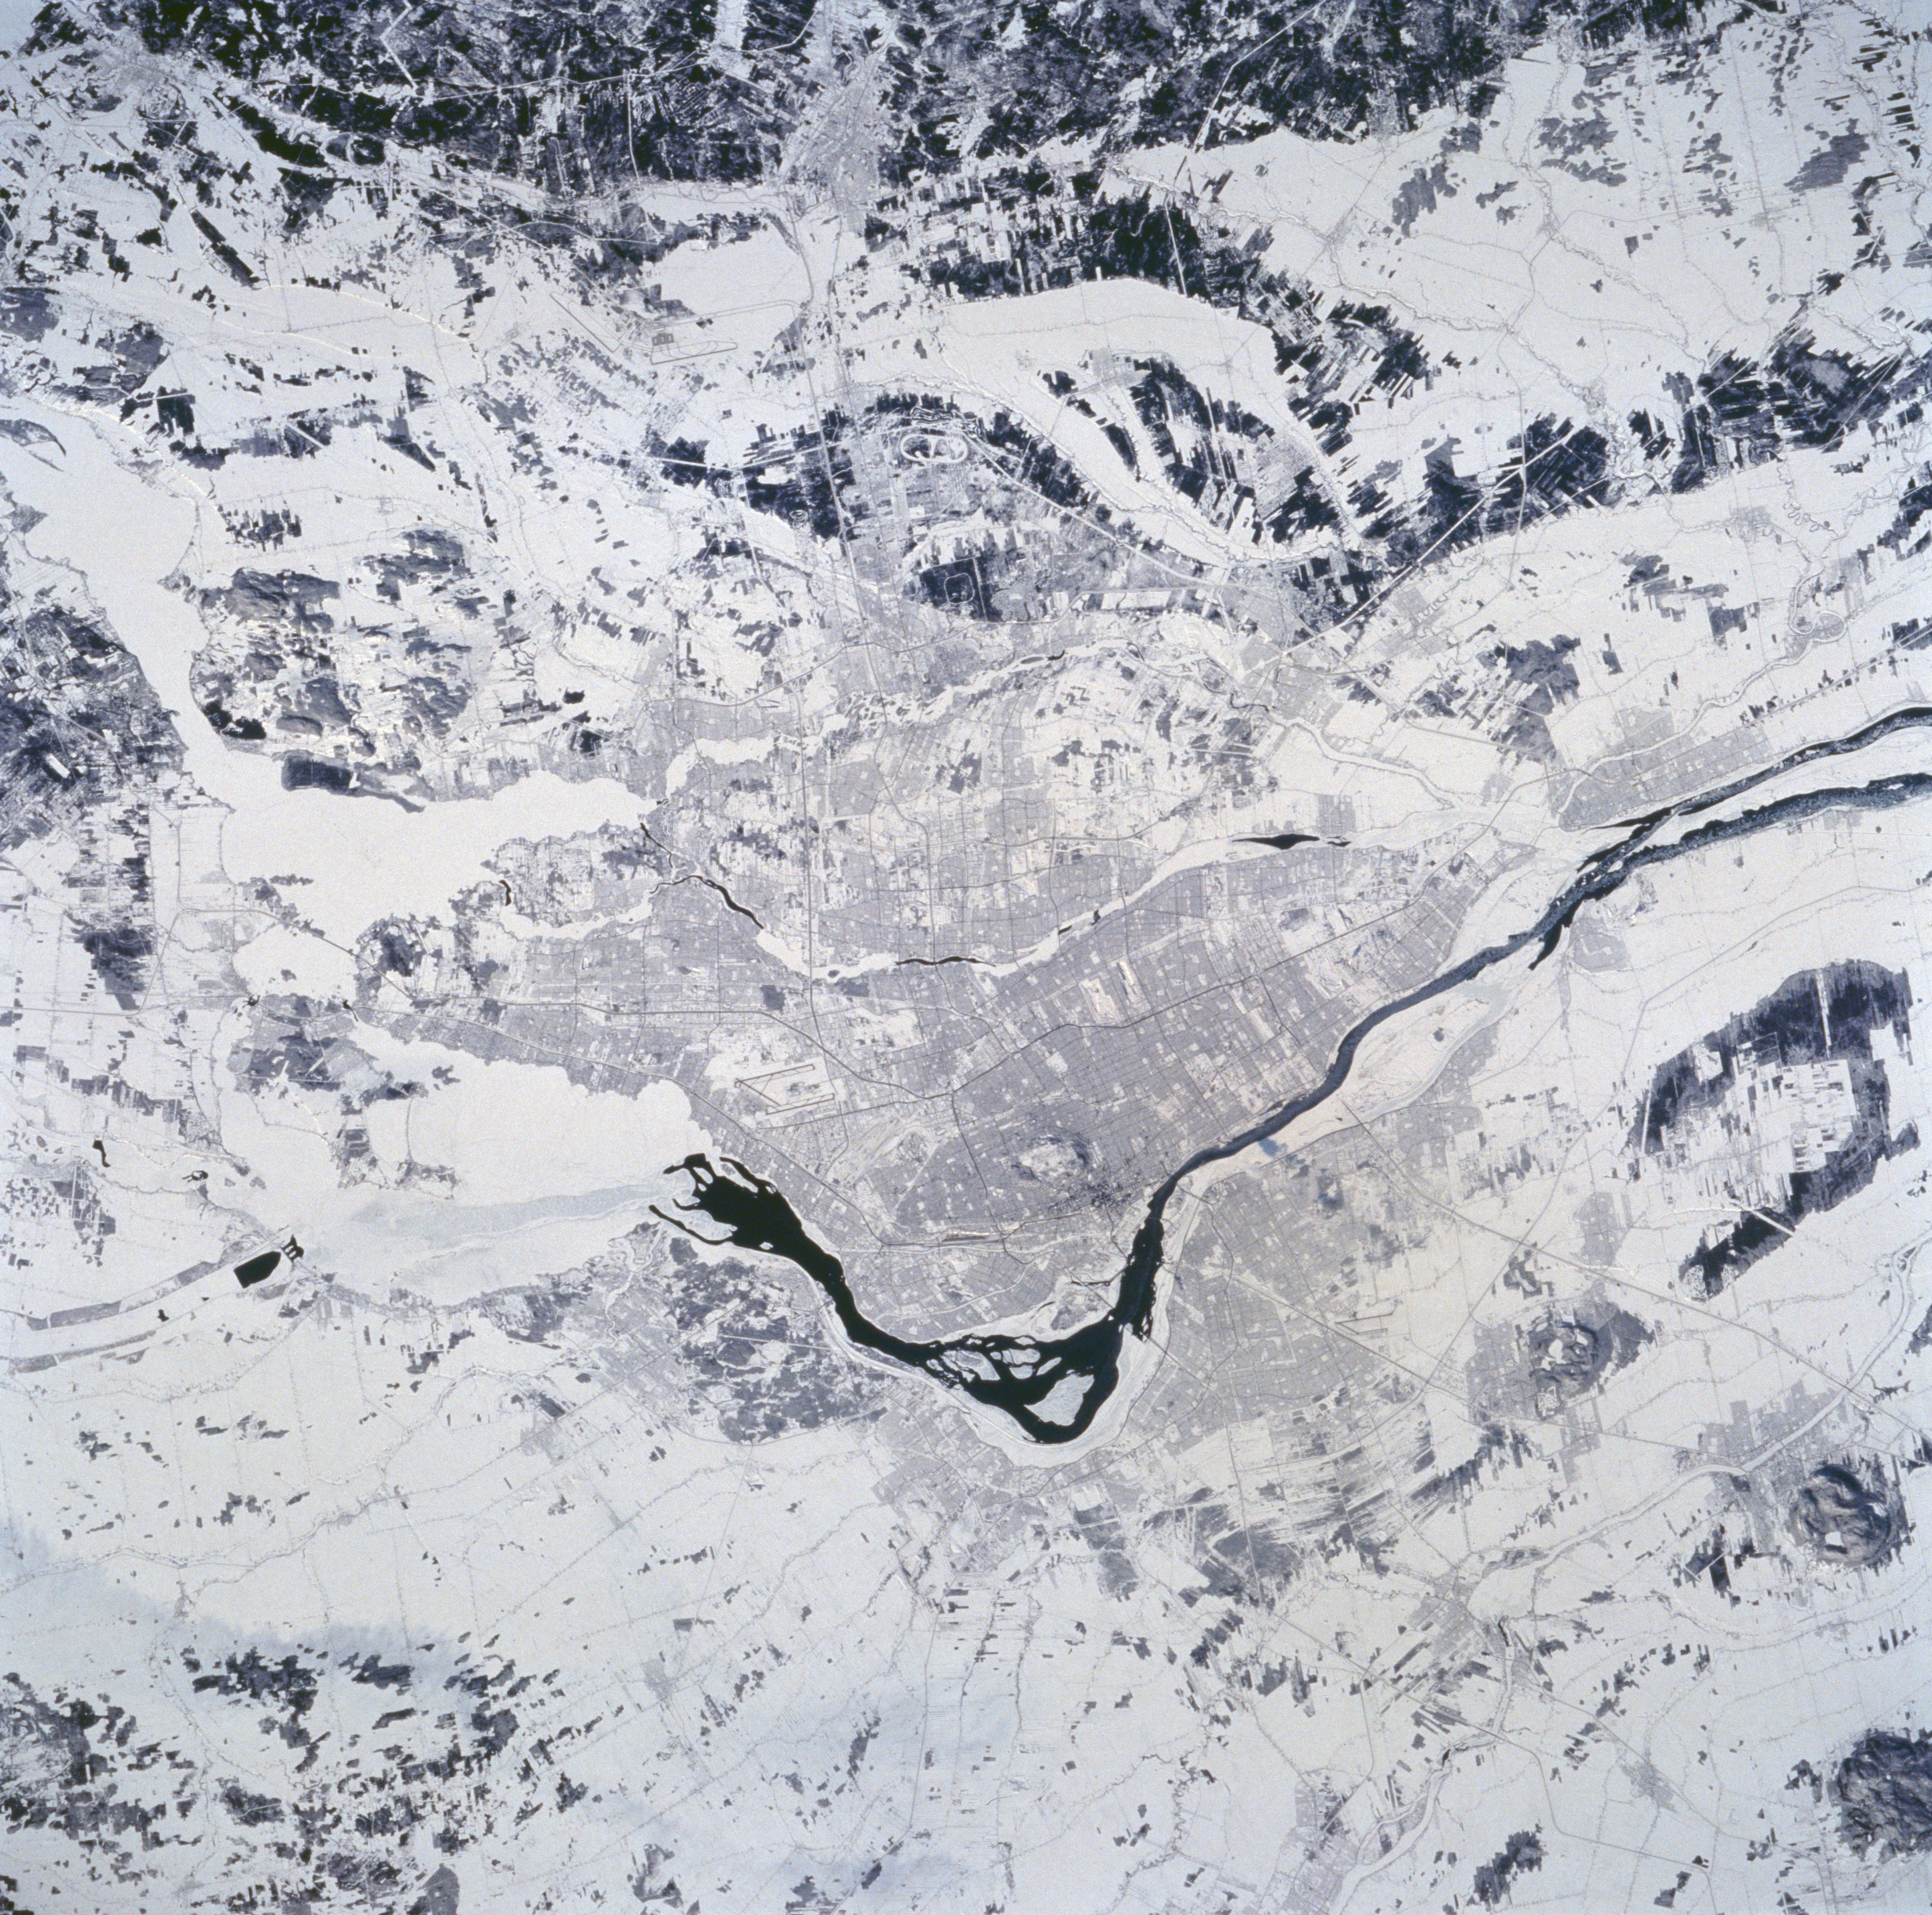 STS-60 Earth observation photographs of North American city Montréal